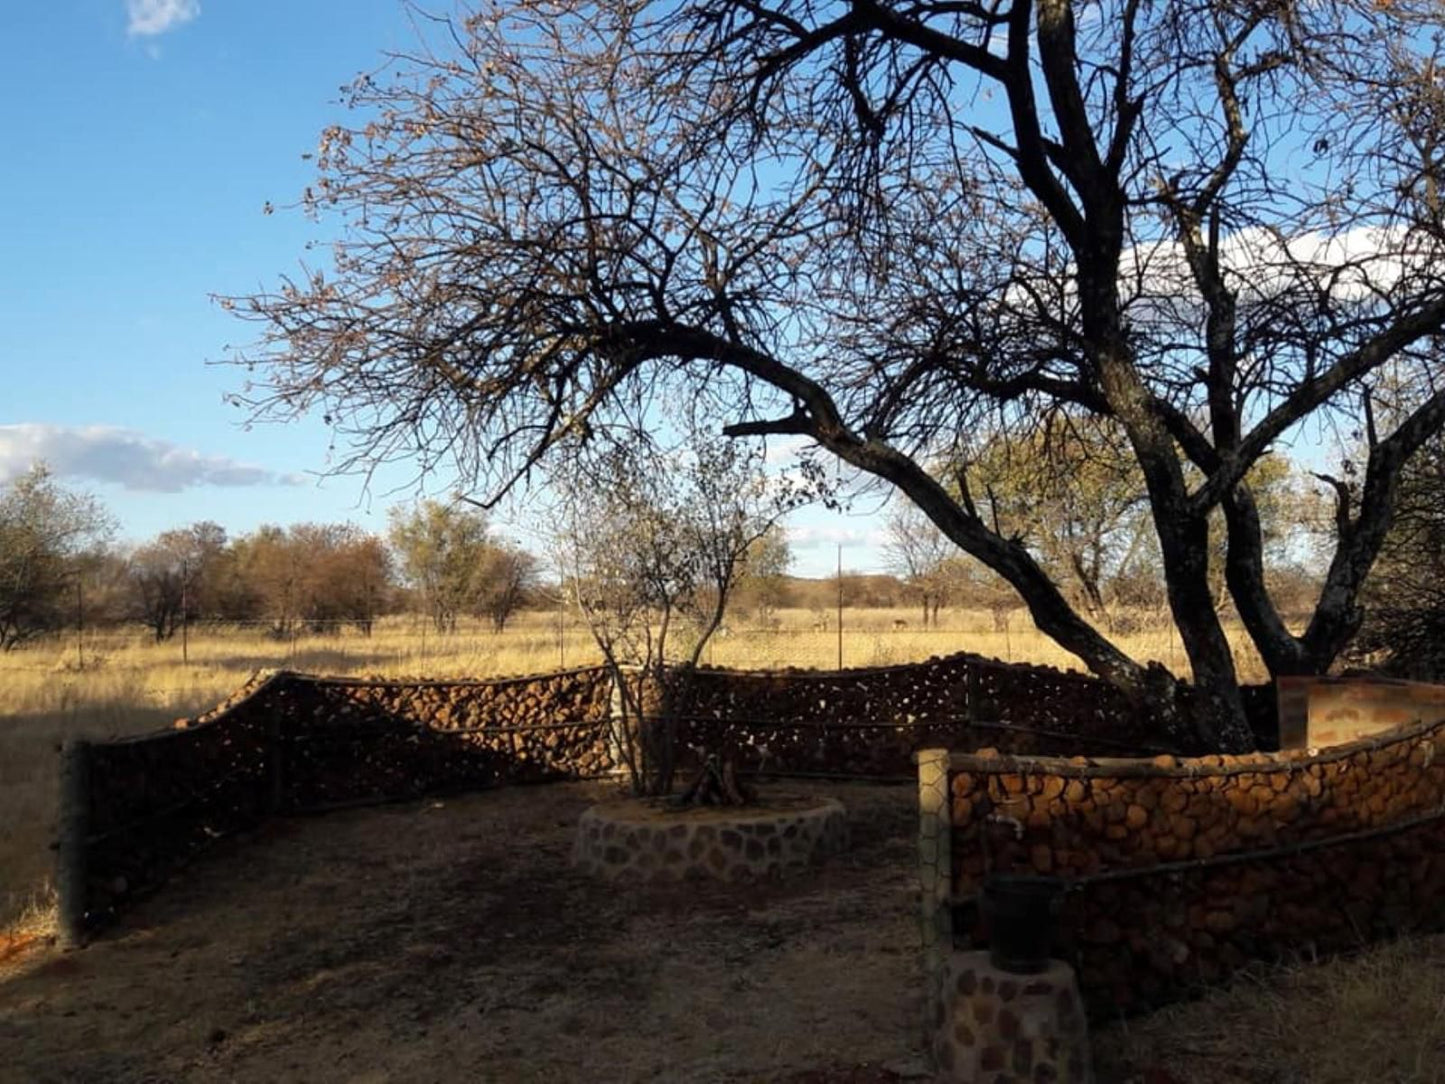 The Ancient Copper Shed Potchefstroom North West Province South Africa Lowland, Nature